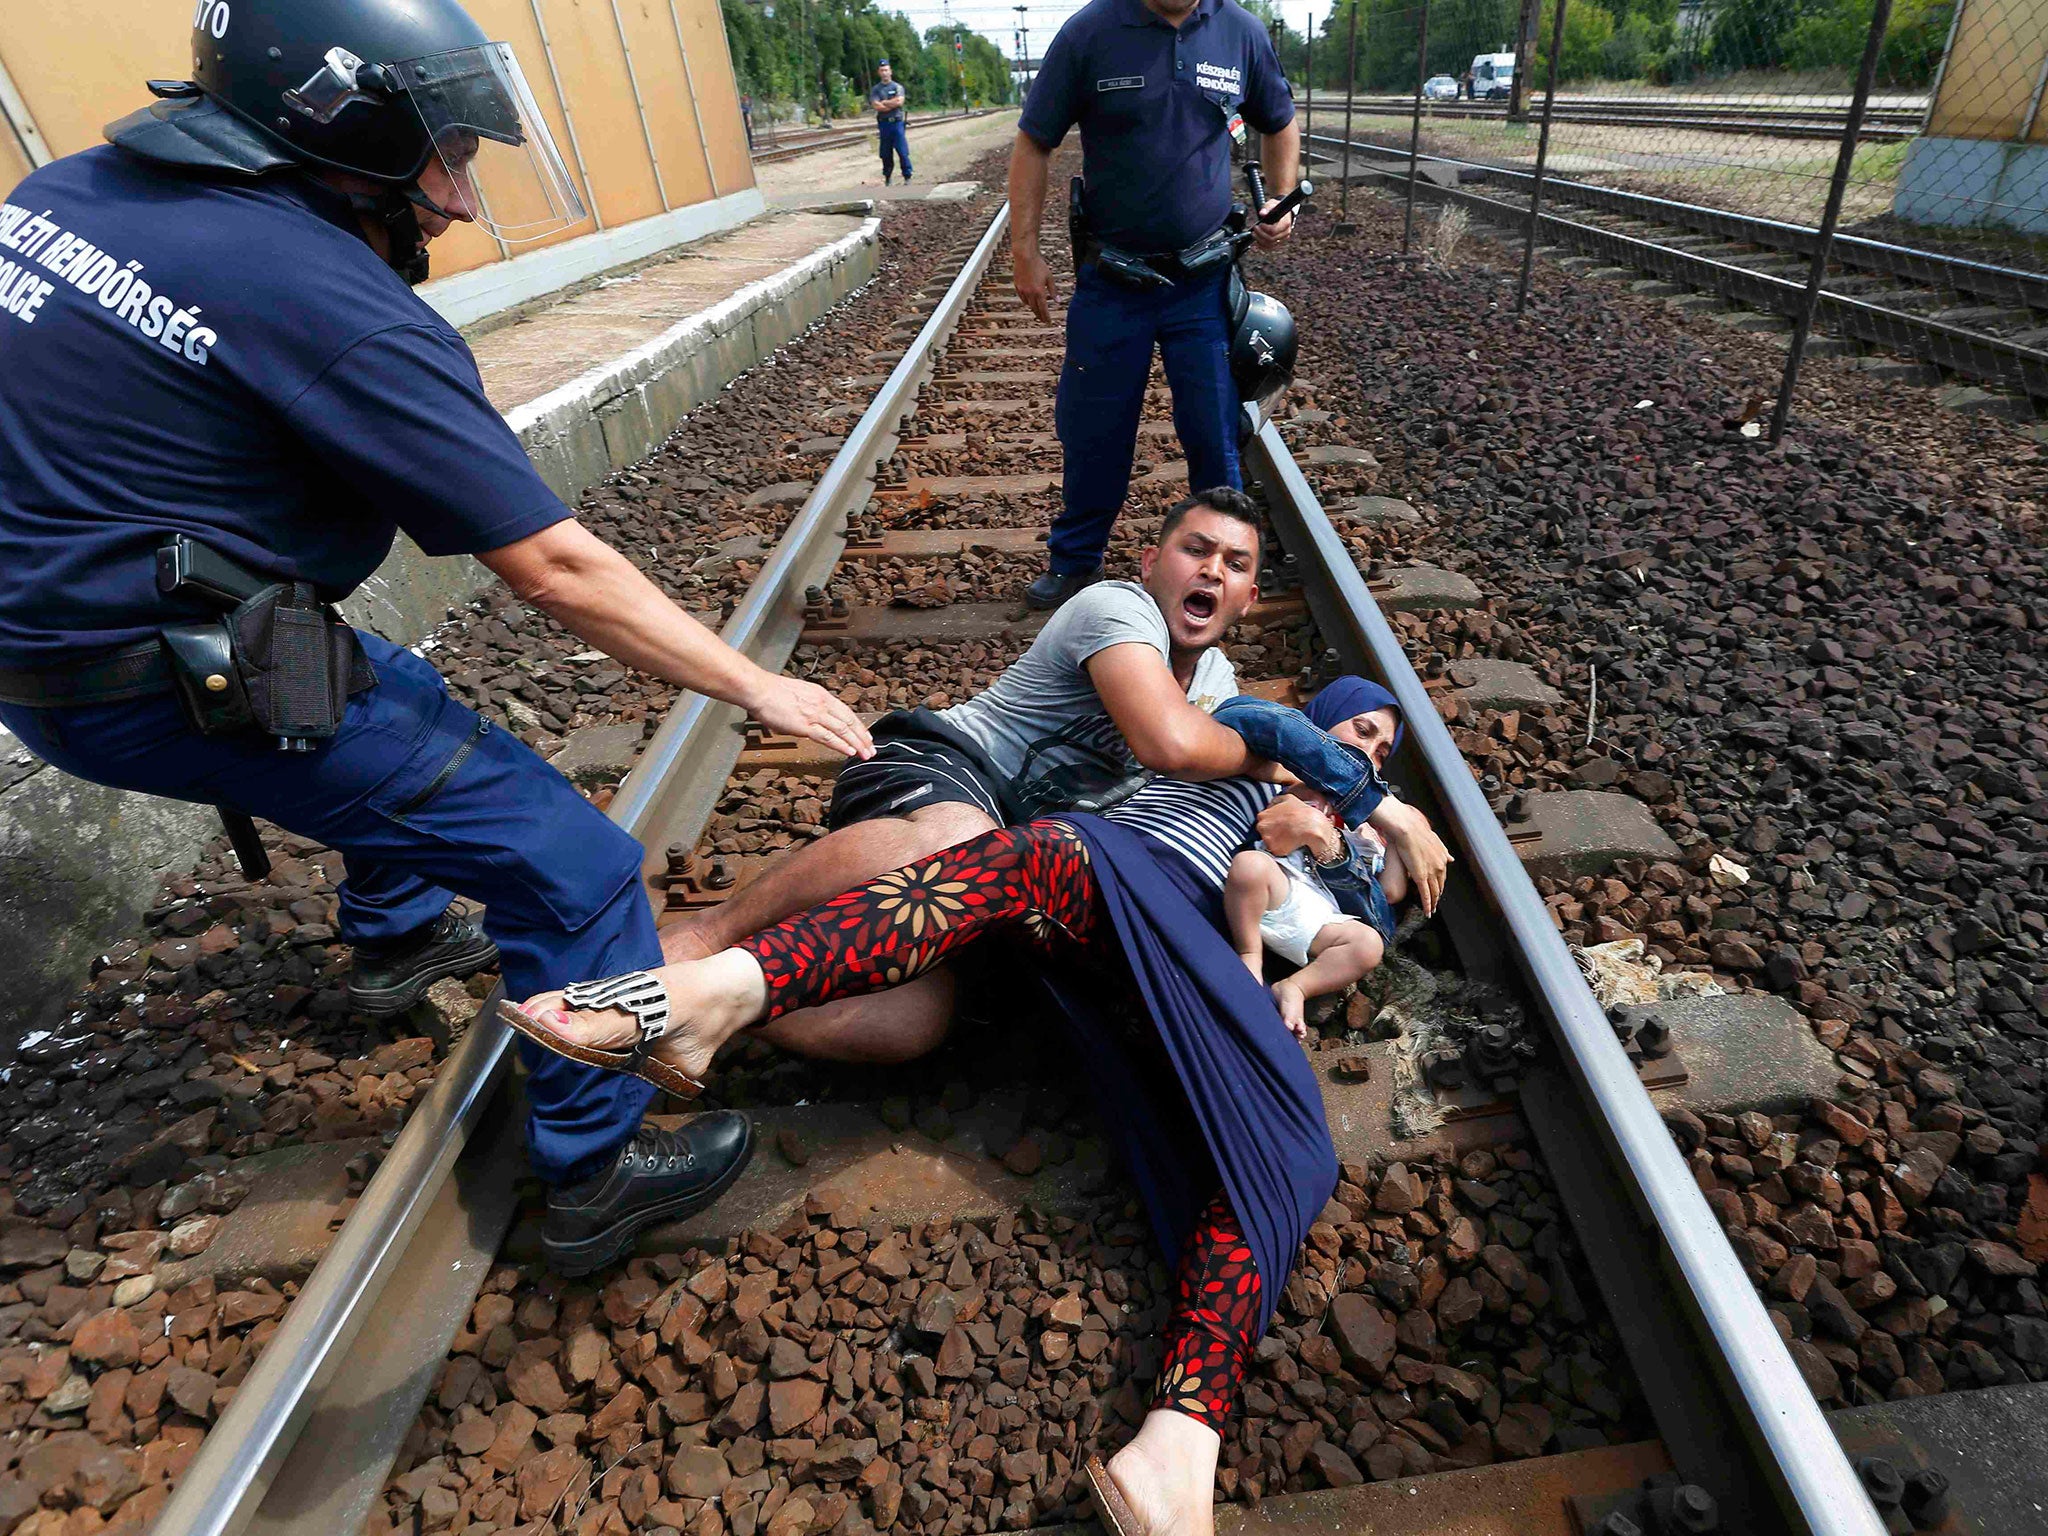 Hungarian policemen seizing a refugee family resisting being sent to a camp in Bicske